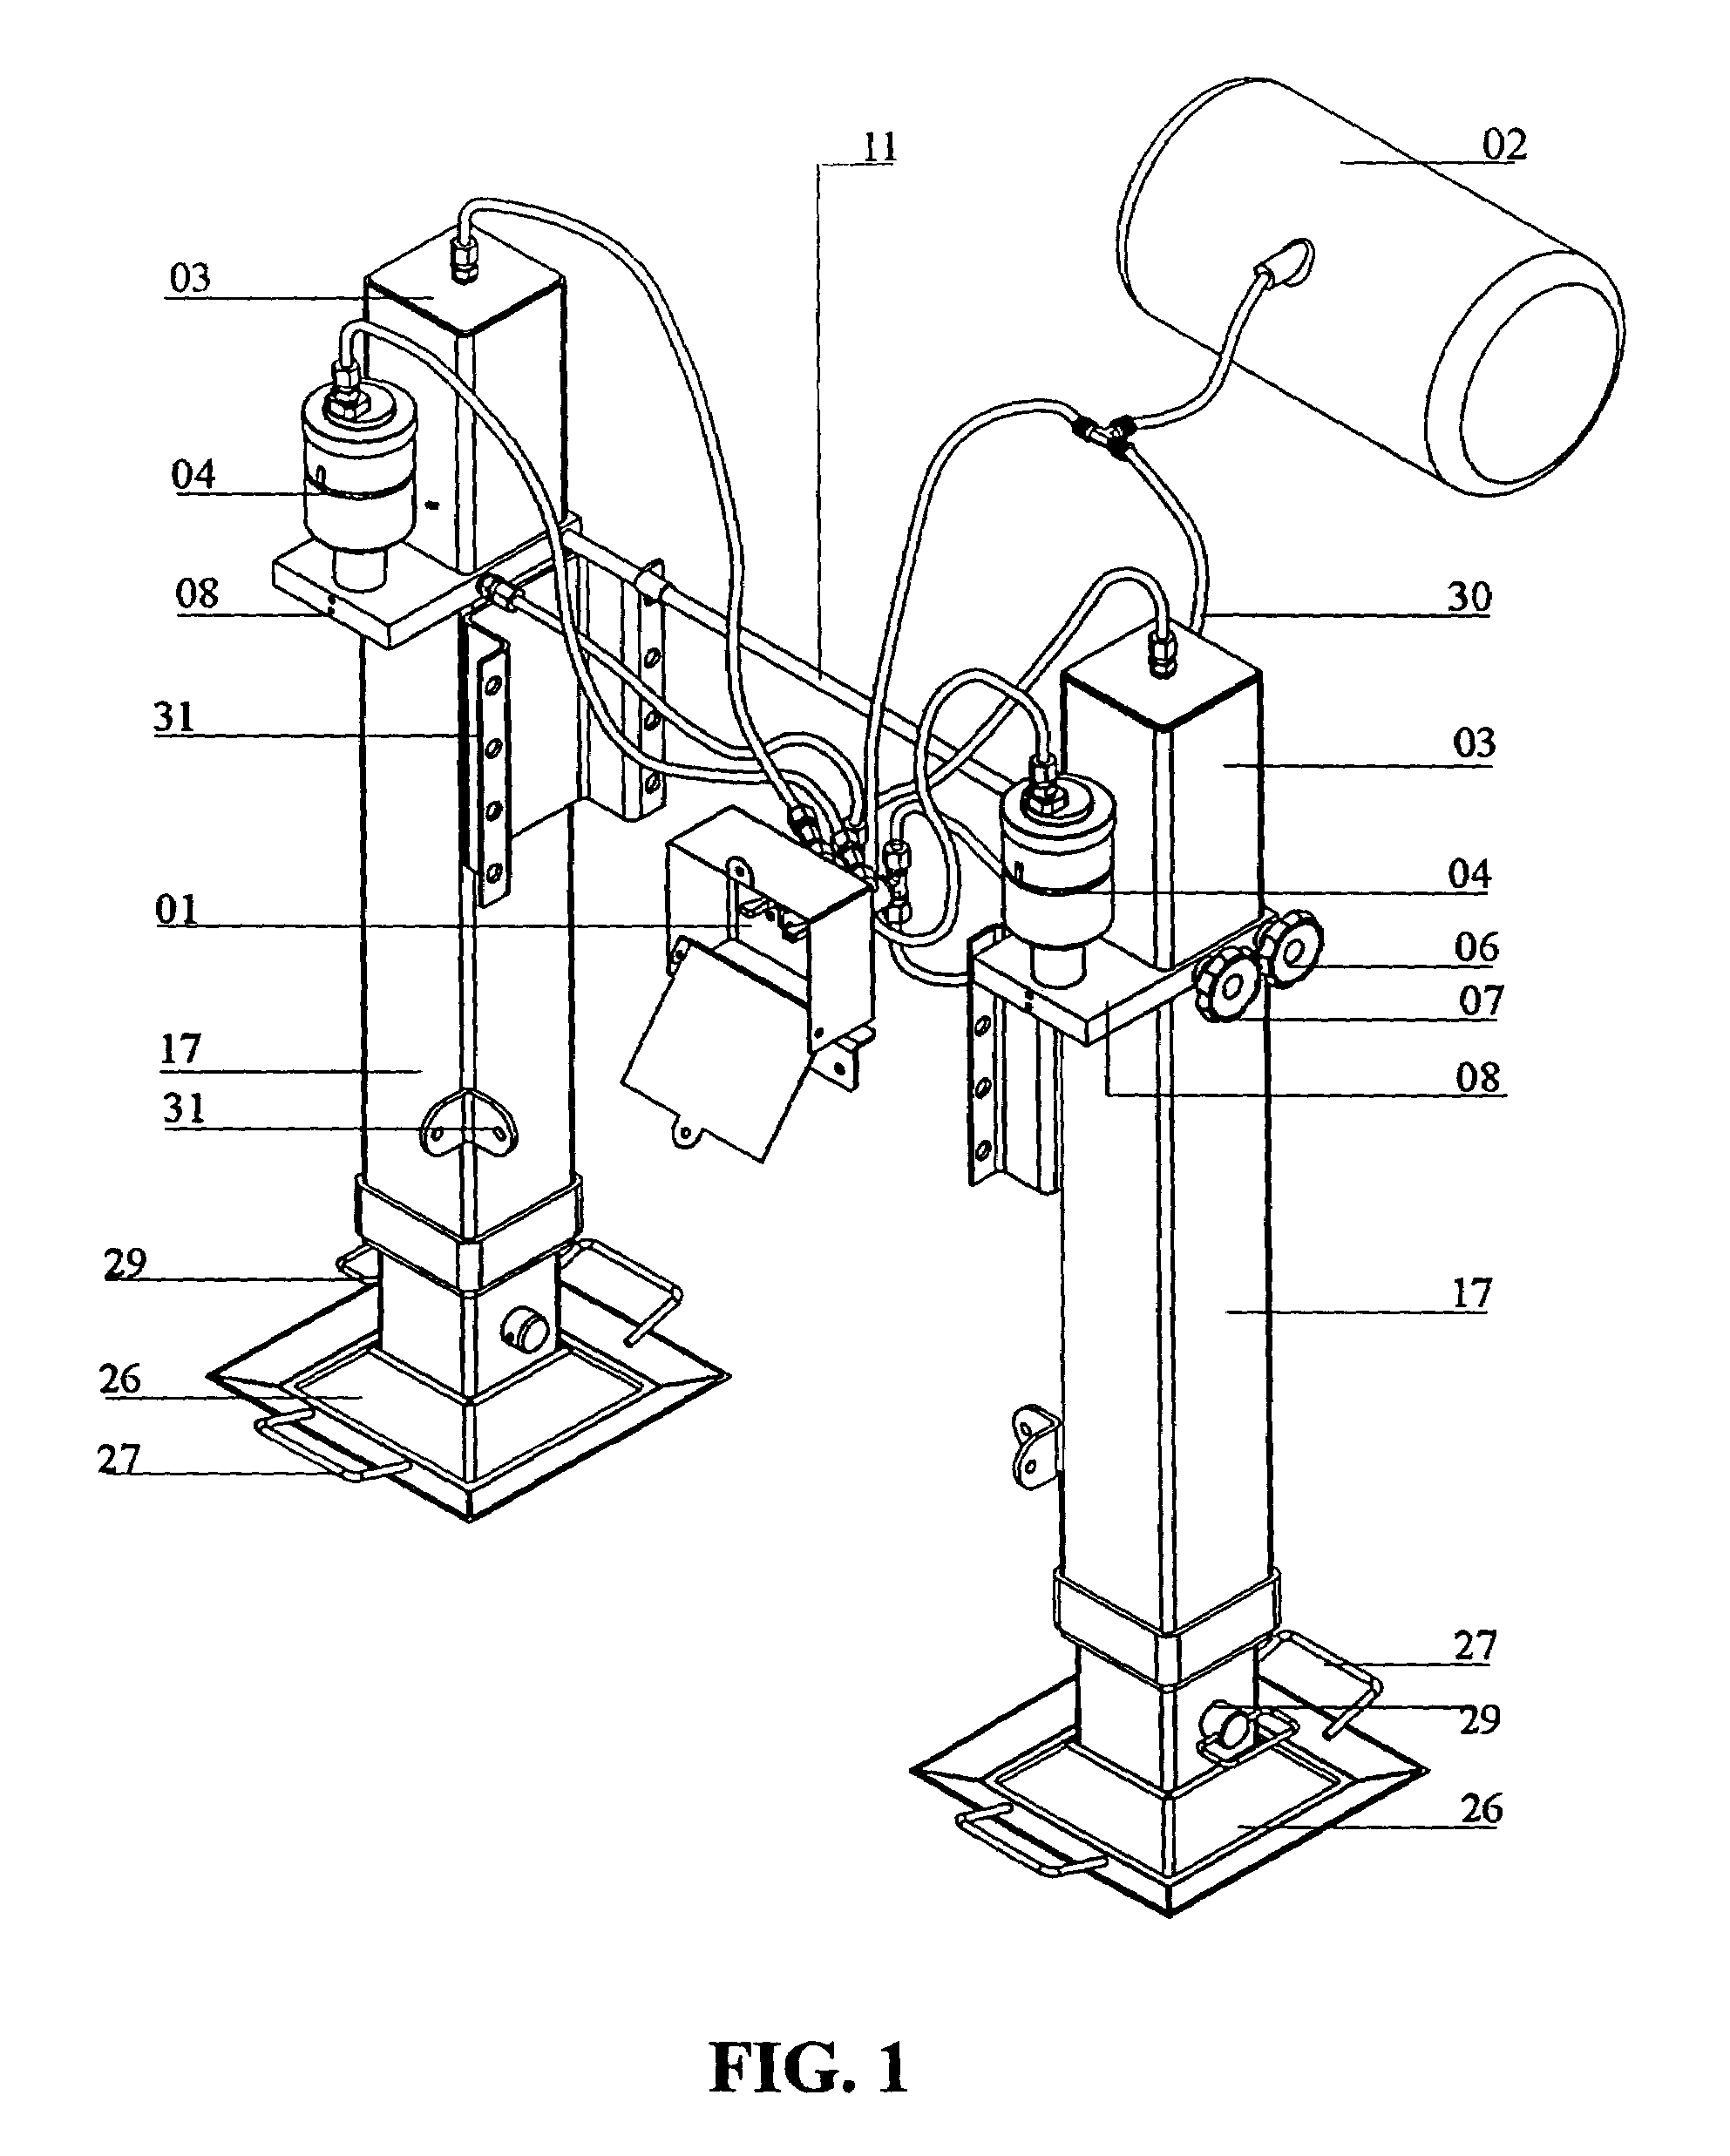 Disposition introduced to hydropneumatic jack